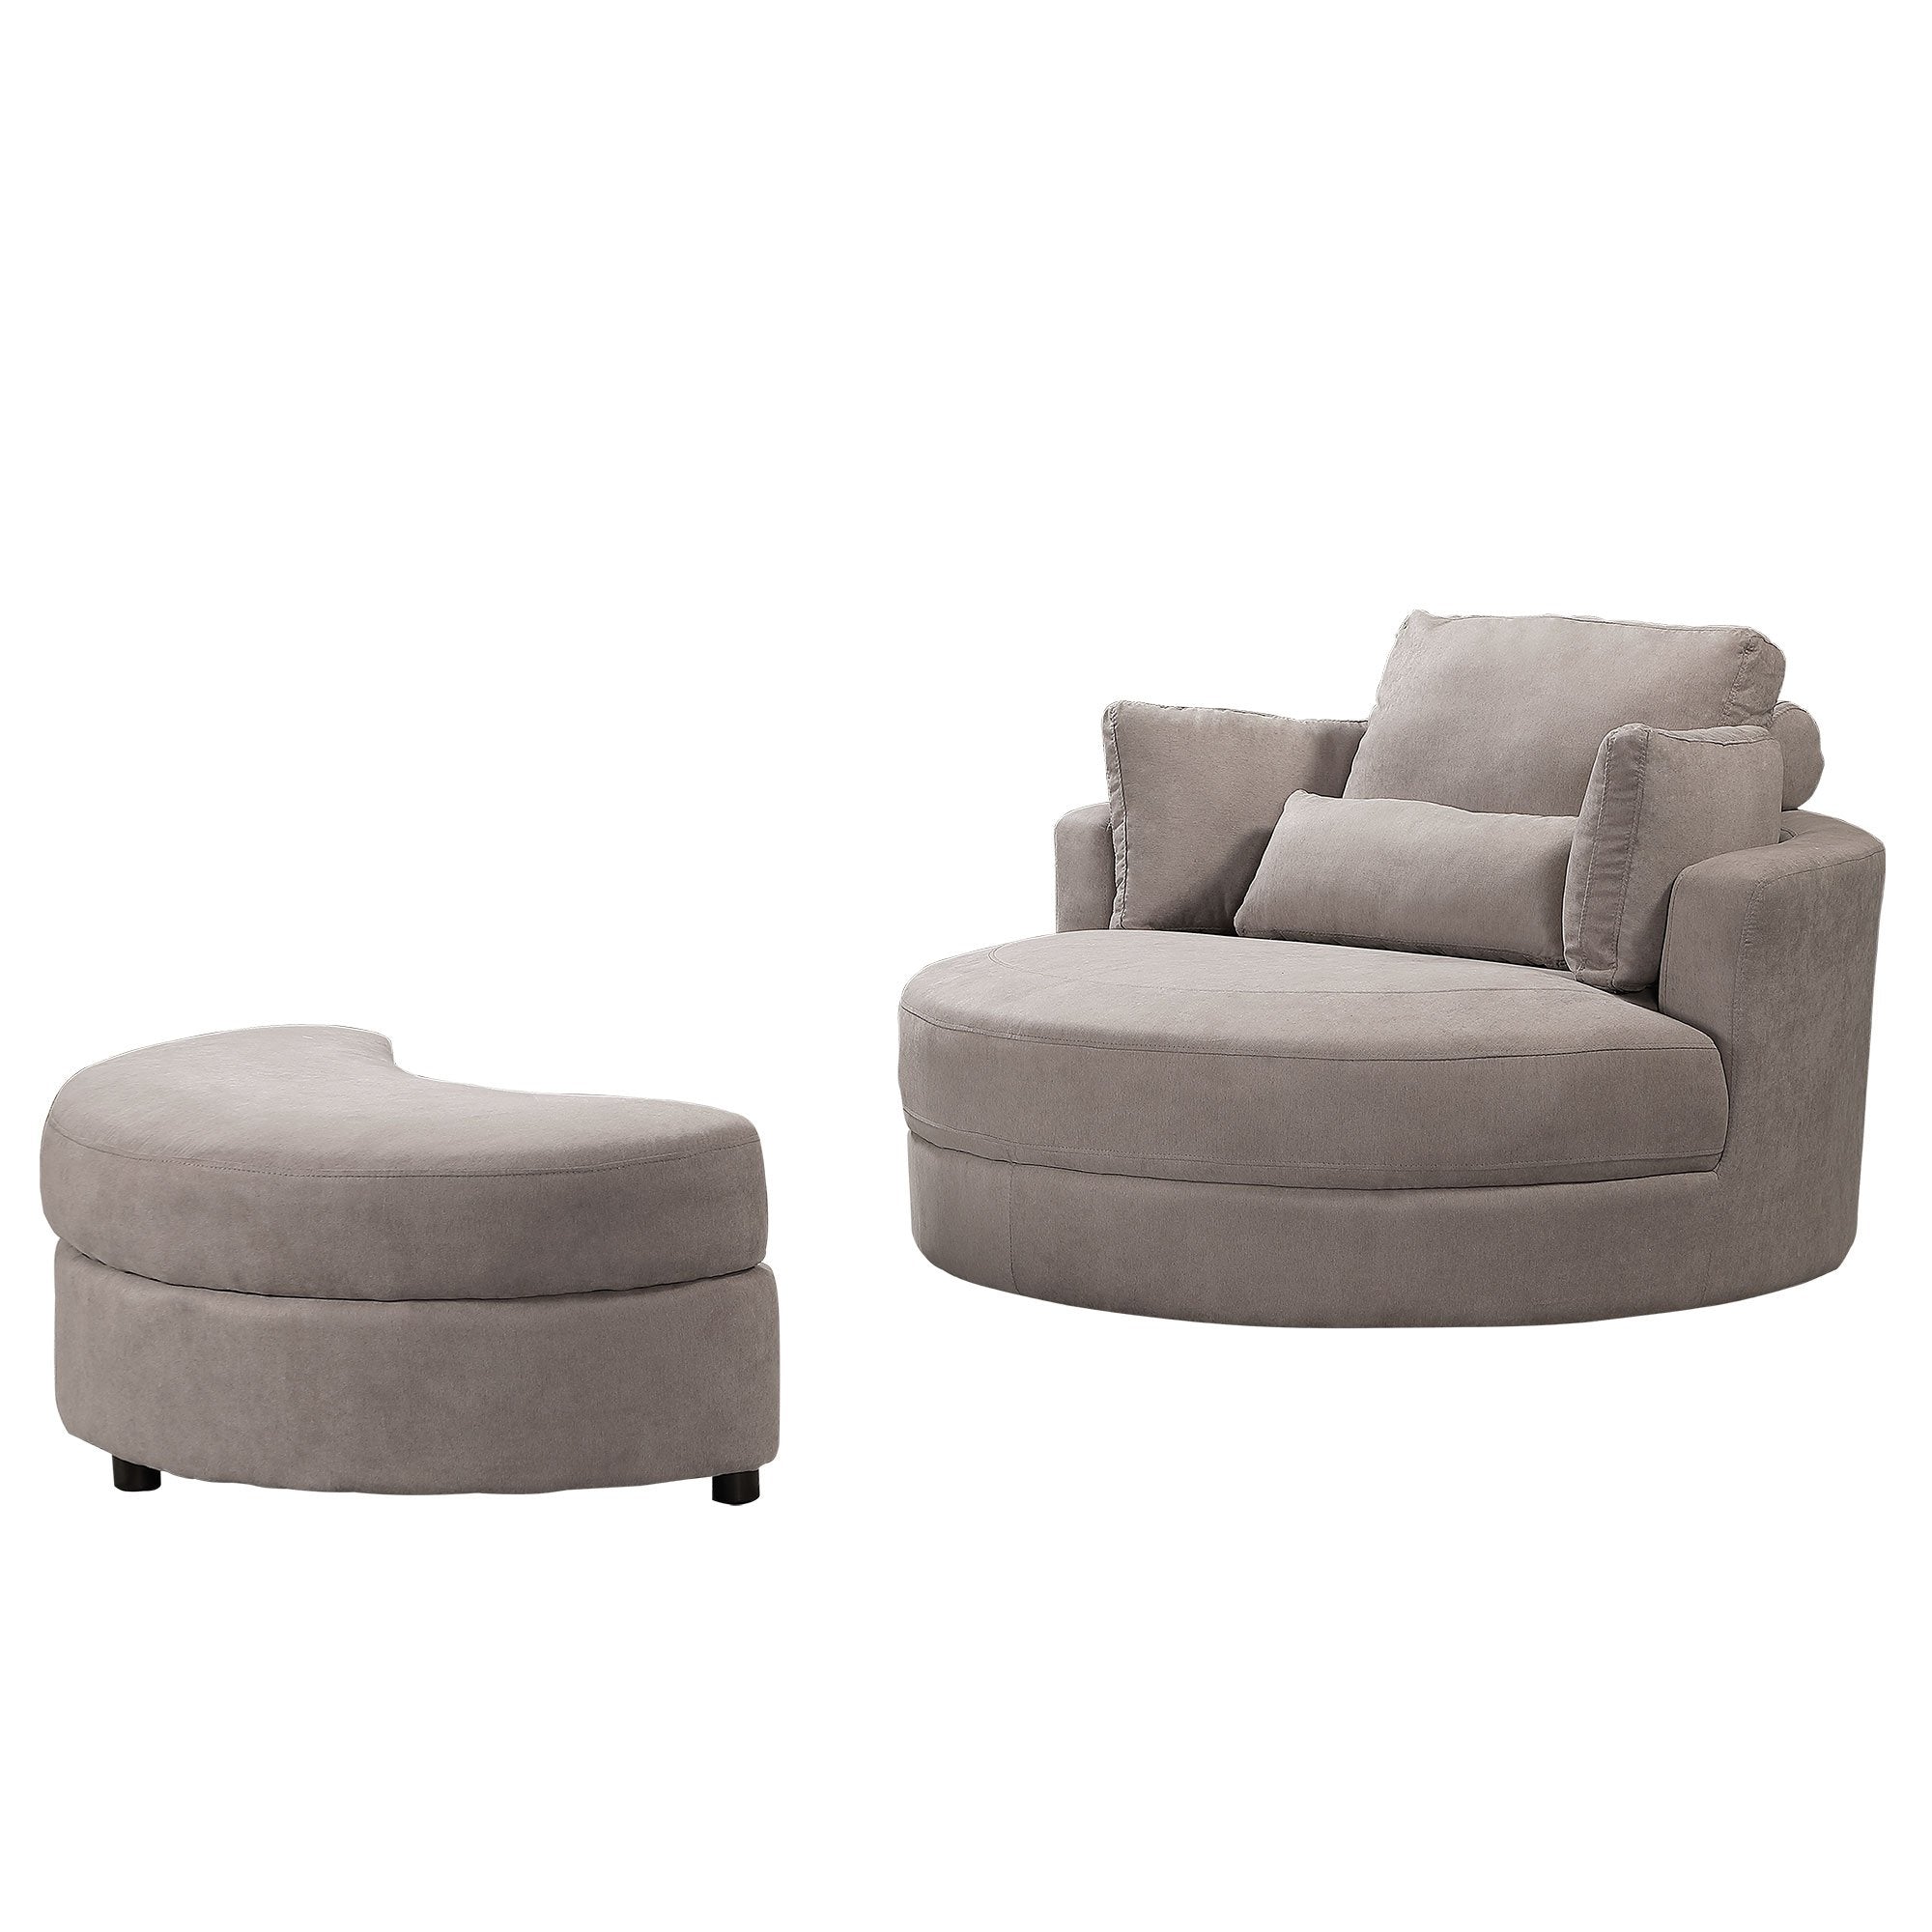 Modern Sofa Lounge Club Big Round Chair with Storage Ottoman Linen Fabric with Pillows